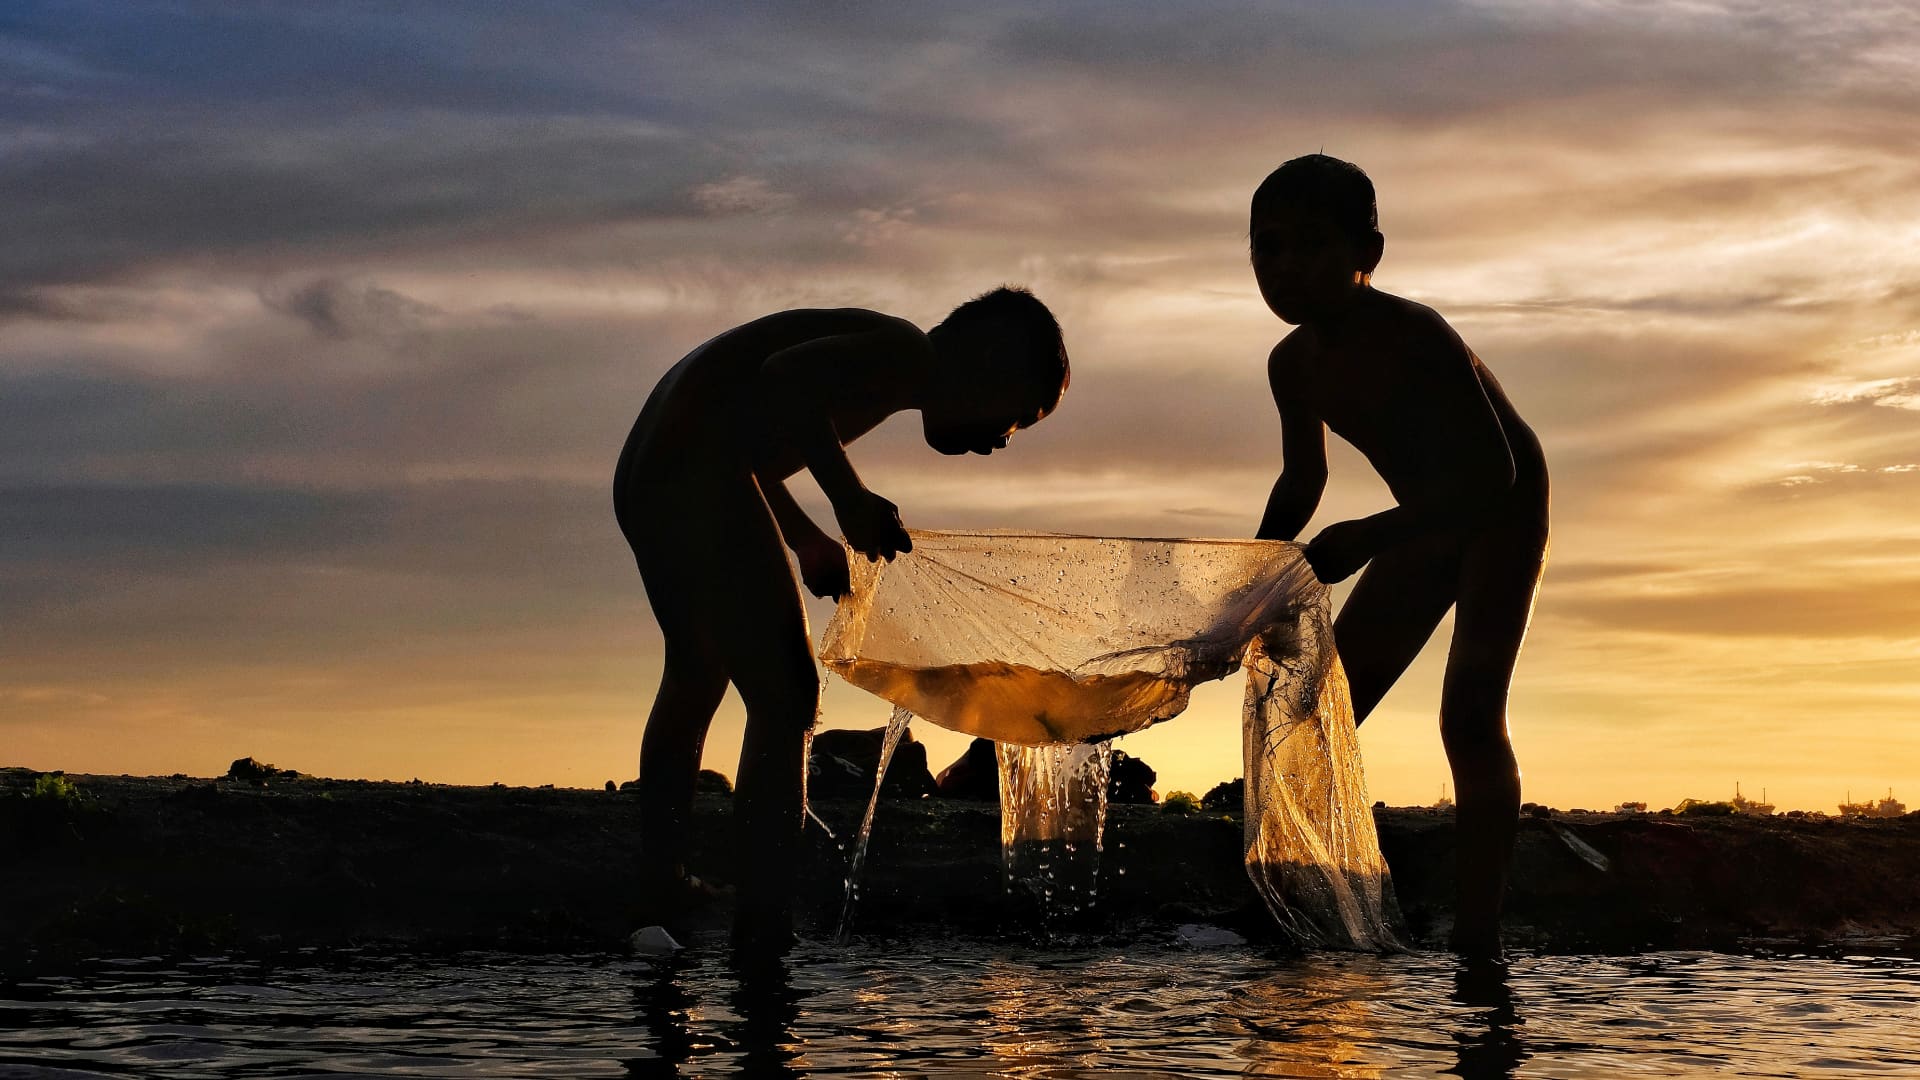 Two boys fish against the sunset sky in Zamboanga, Philippines.